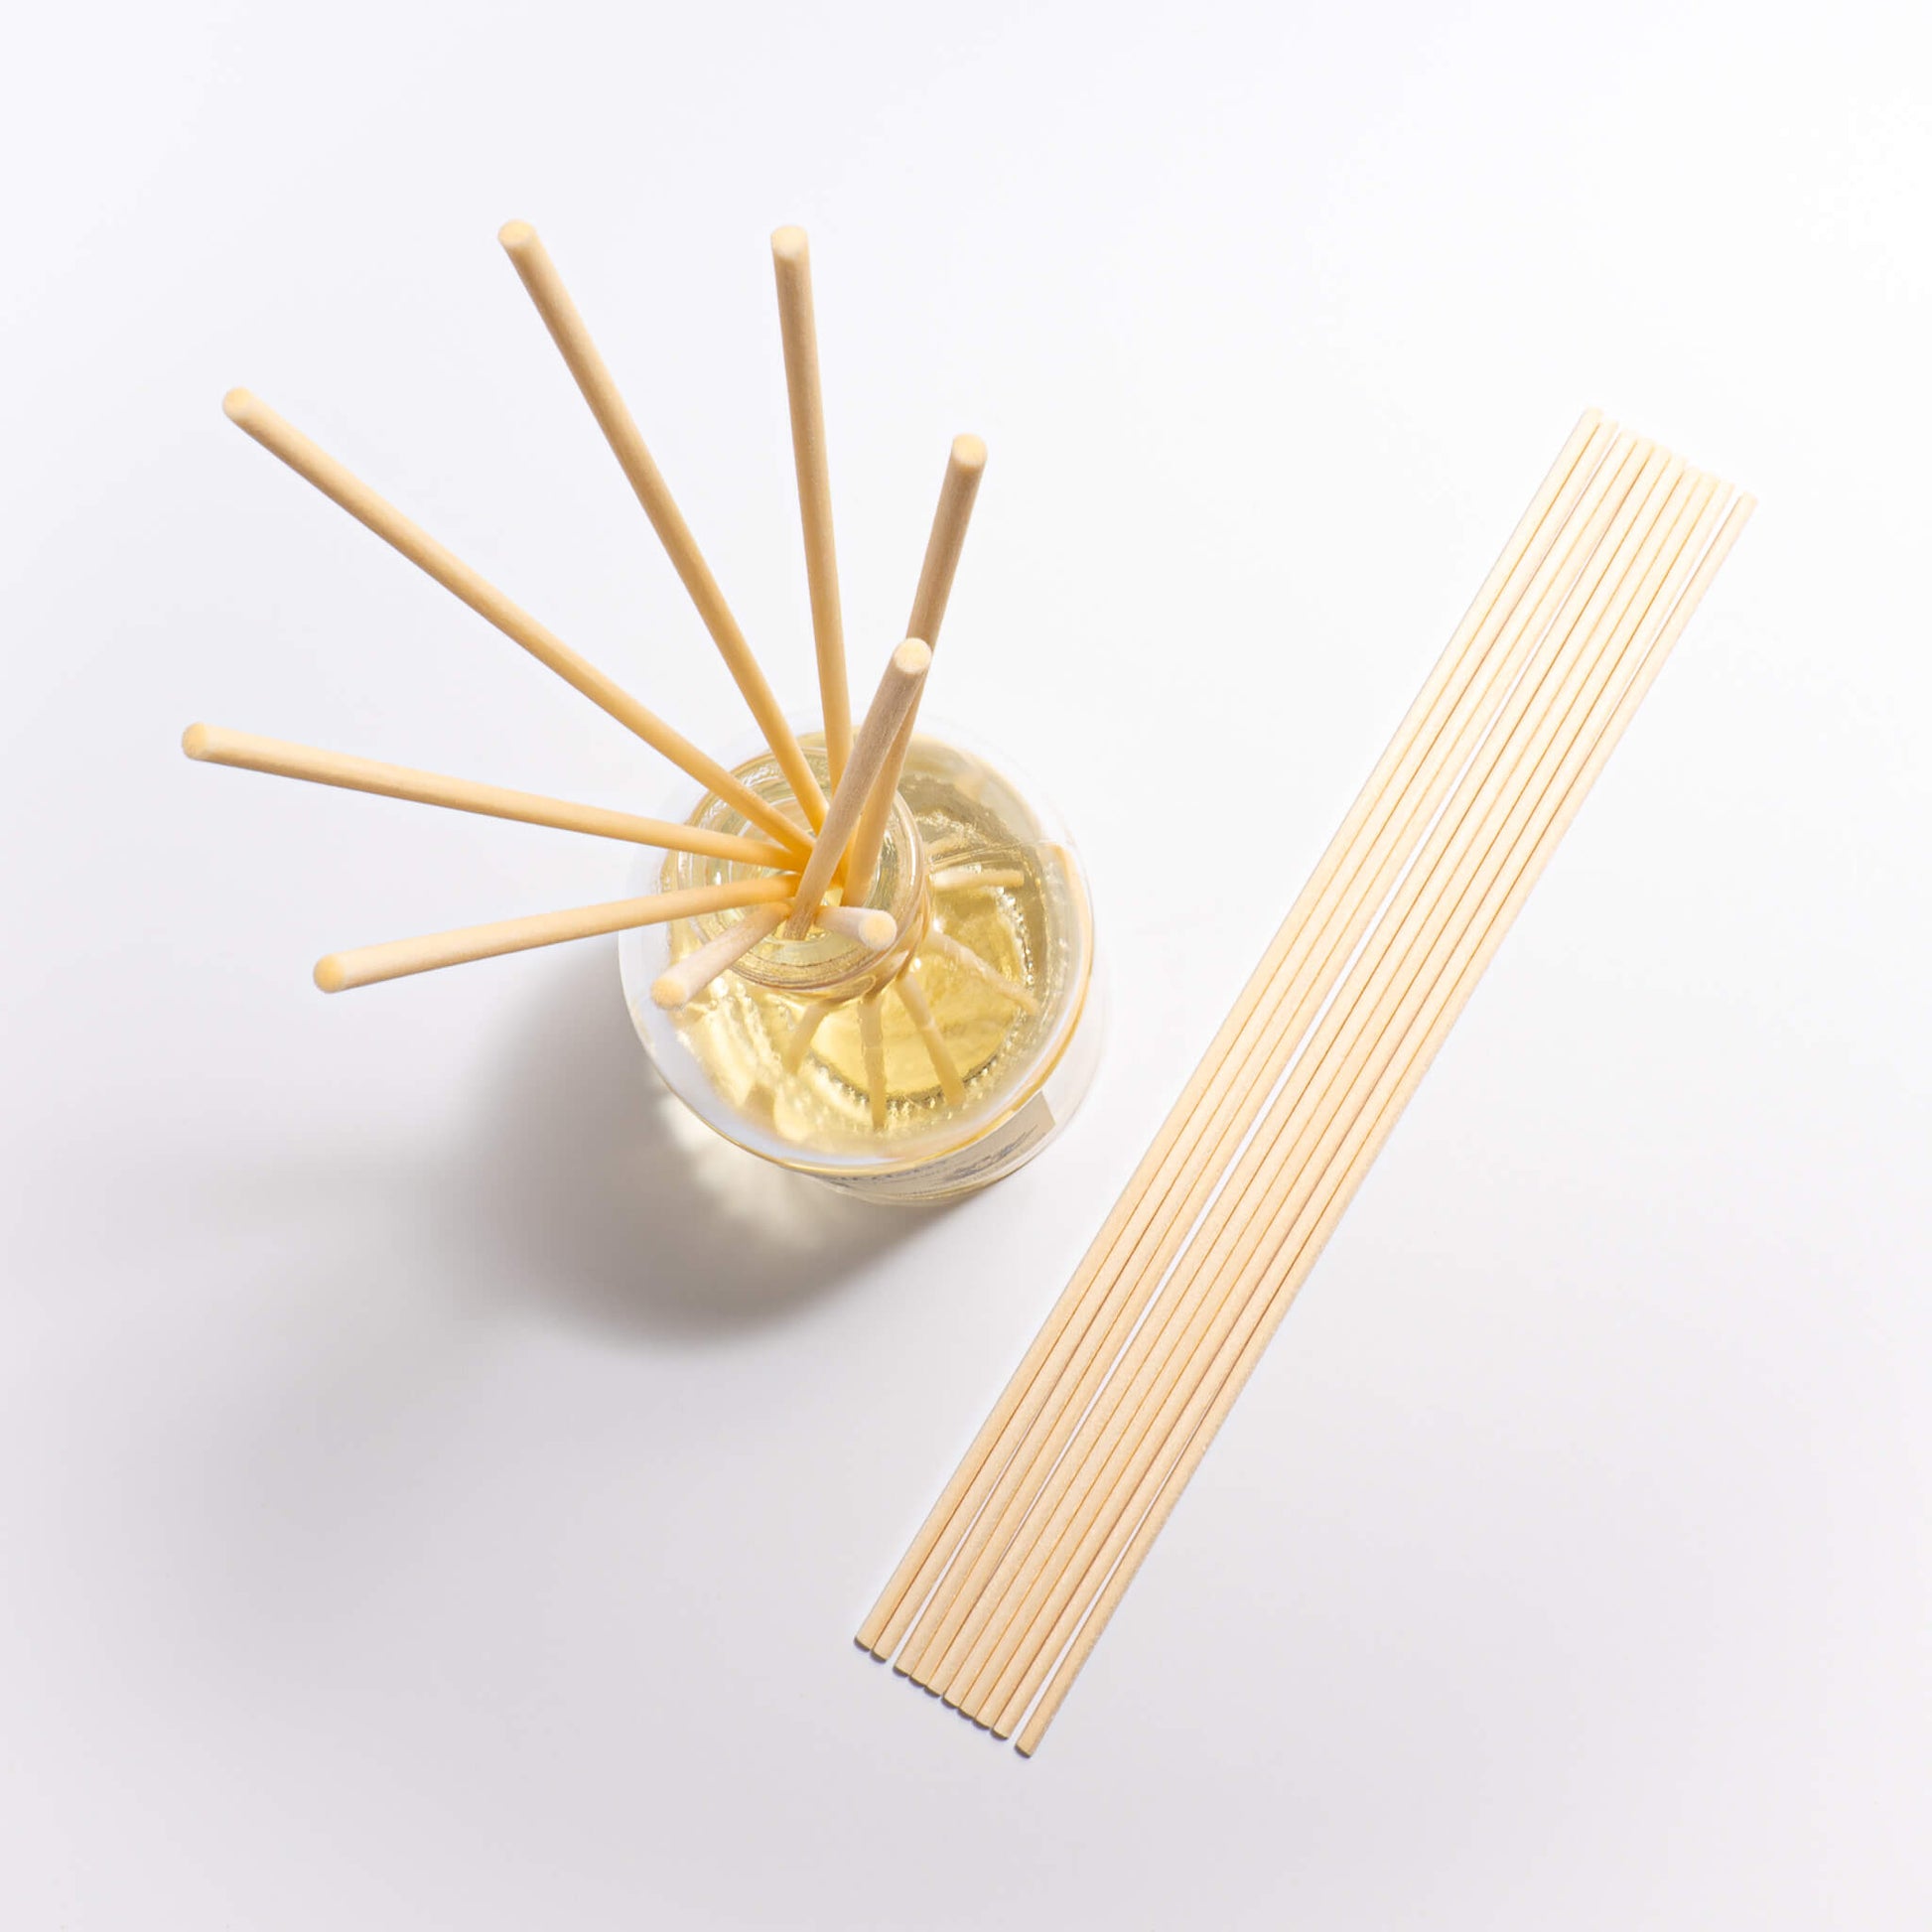 set of 10 replacement reed diffuser sticks available for purchase made from natural fibres, natural colour